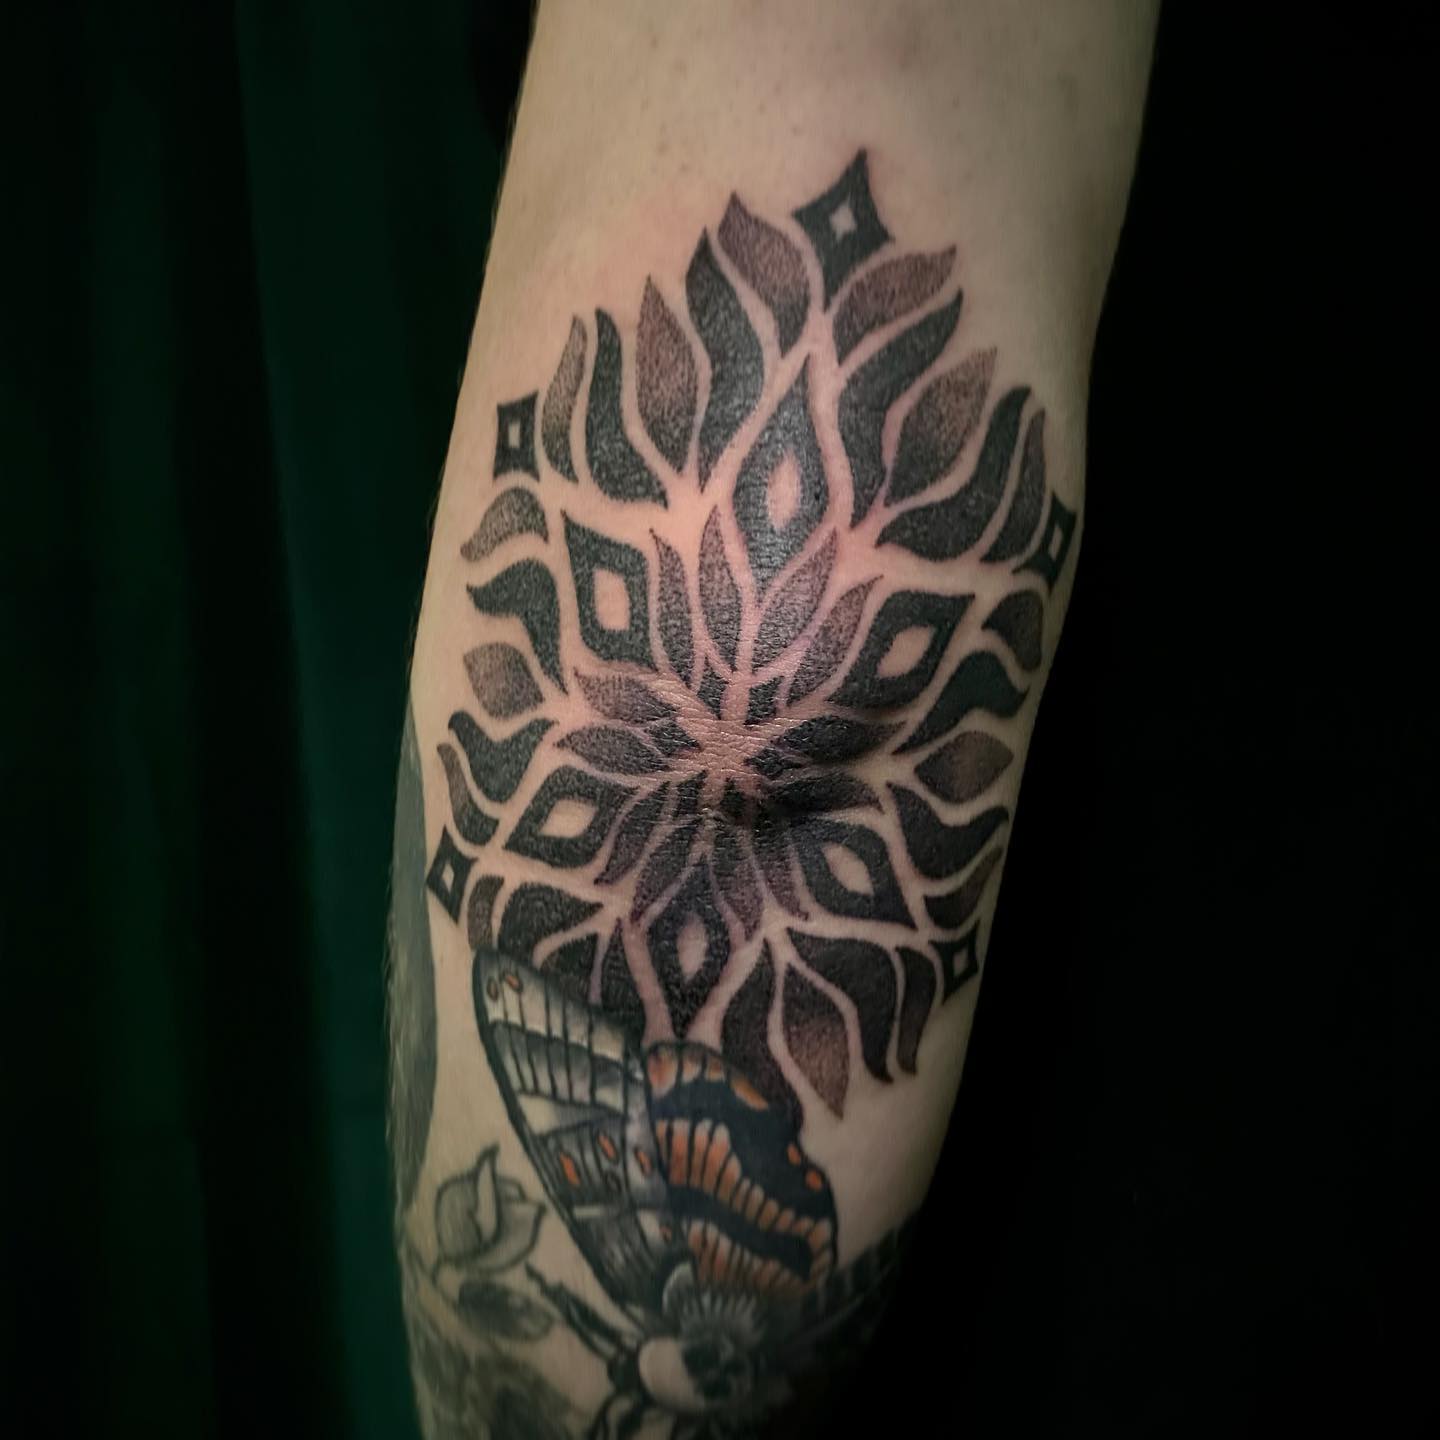 This elbow tattoo is covered in all the little details and is often worn by those who fancy precision. Go for a tree of life and let the world see how methodical and logical you are.